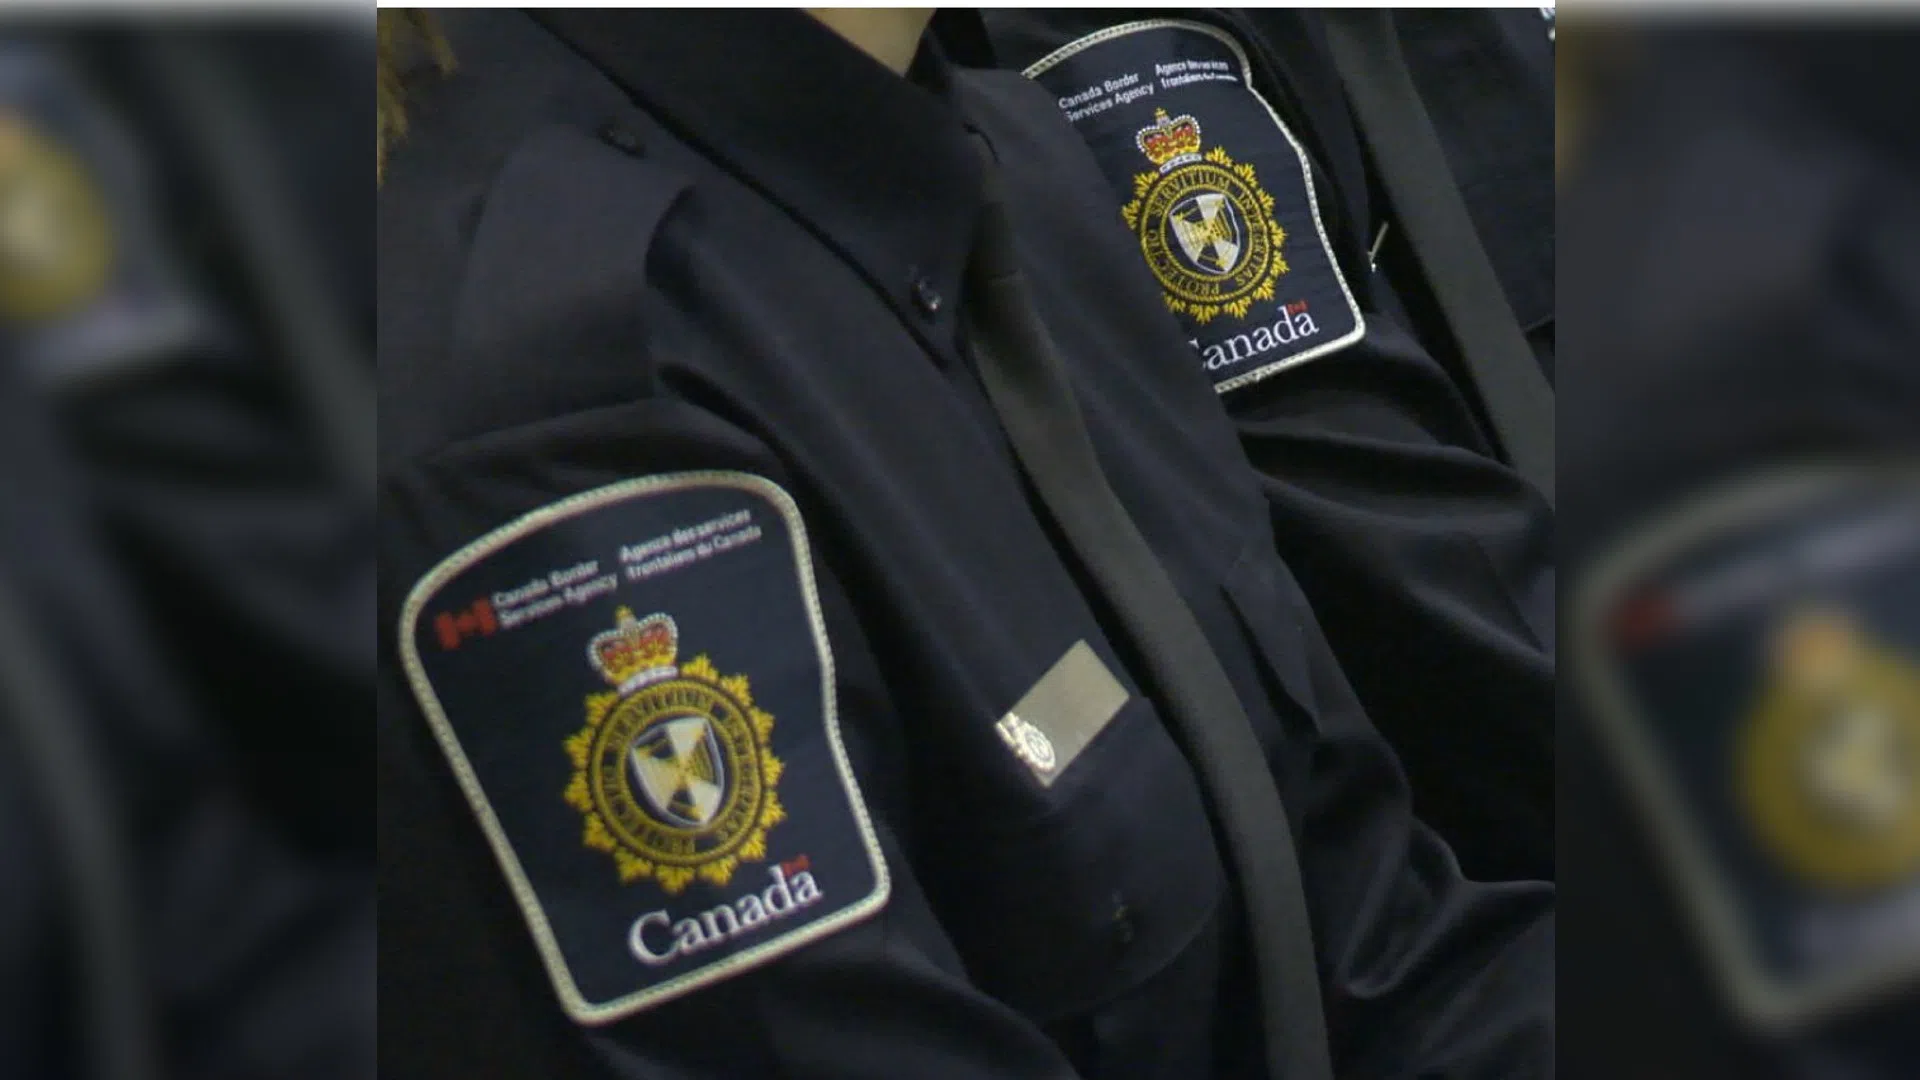 Strike vote scheduled for Canada border officers